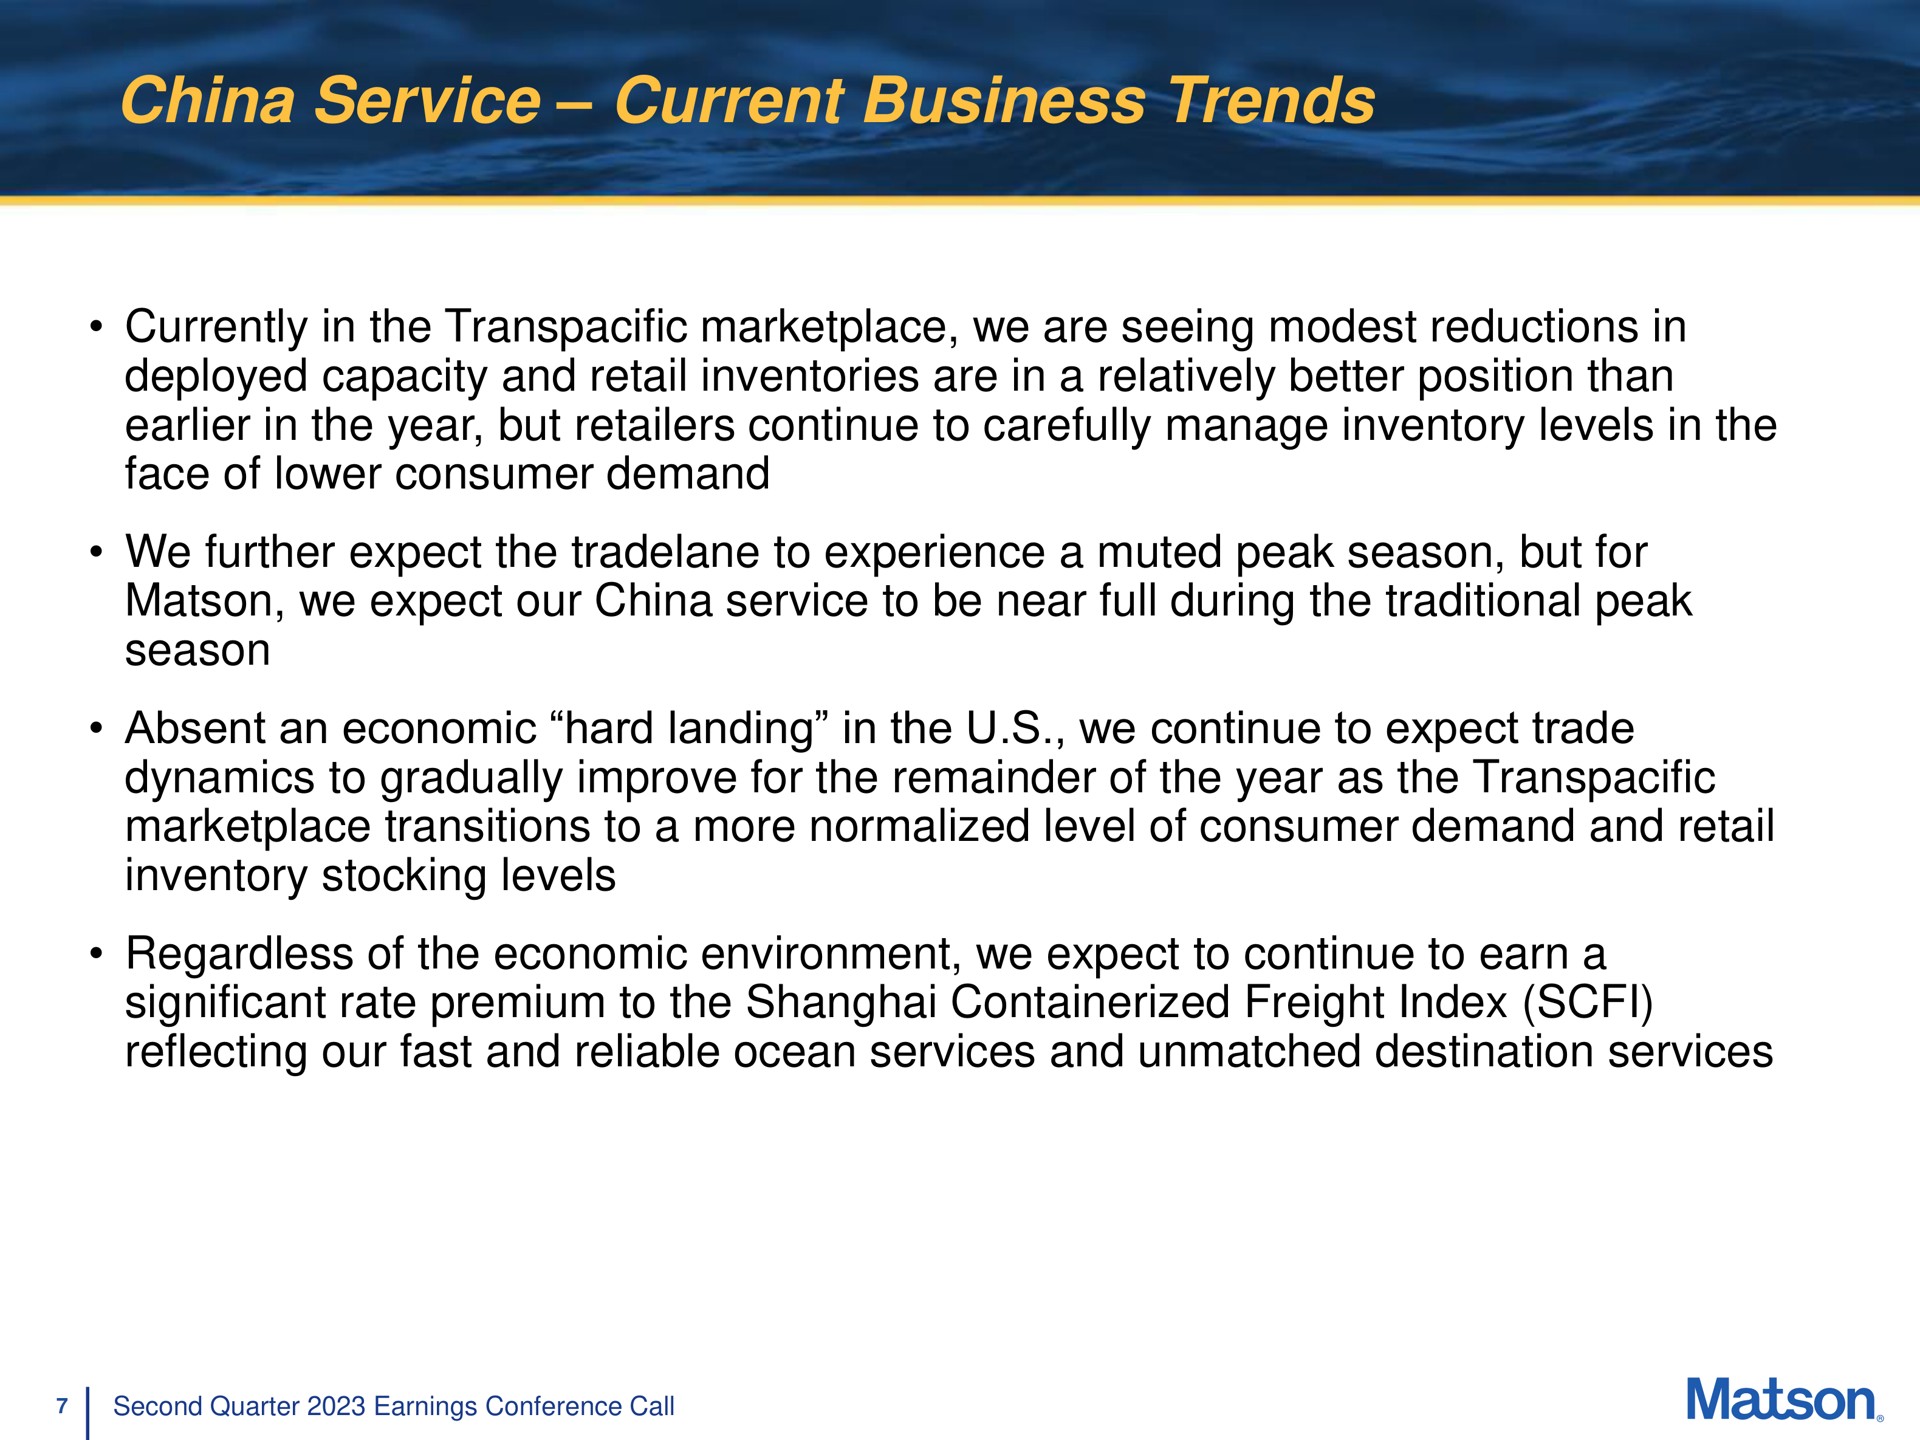 china service current business trends currently in the transpacific we are seeing modest reductions in deployed capacity and retail inventories are in a relatively better position than in the year but retailers continue to carefully manage inventory levels in the face of lower consumer demand we further expect the to experience a muted peak season but for we expect our china service to be near full during the traditional peak season absent an economic hard landing in the we continue to expect trade dynamics to gradually improve for the remainder of the year as the transpacific transitions to a more normalized level of consumer demand and retail inventory stocking levels regardless of the economic environment we expect to continue to earn a significant rate premium to the shanghai freight index reflecting our fast and reliable ocean services and unmatched destination services | Matson